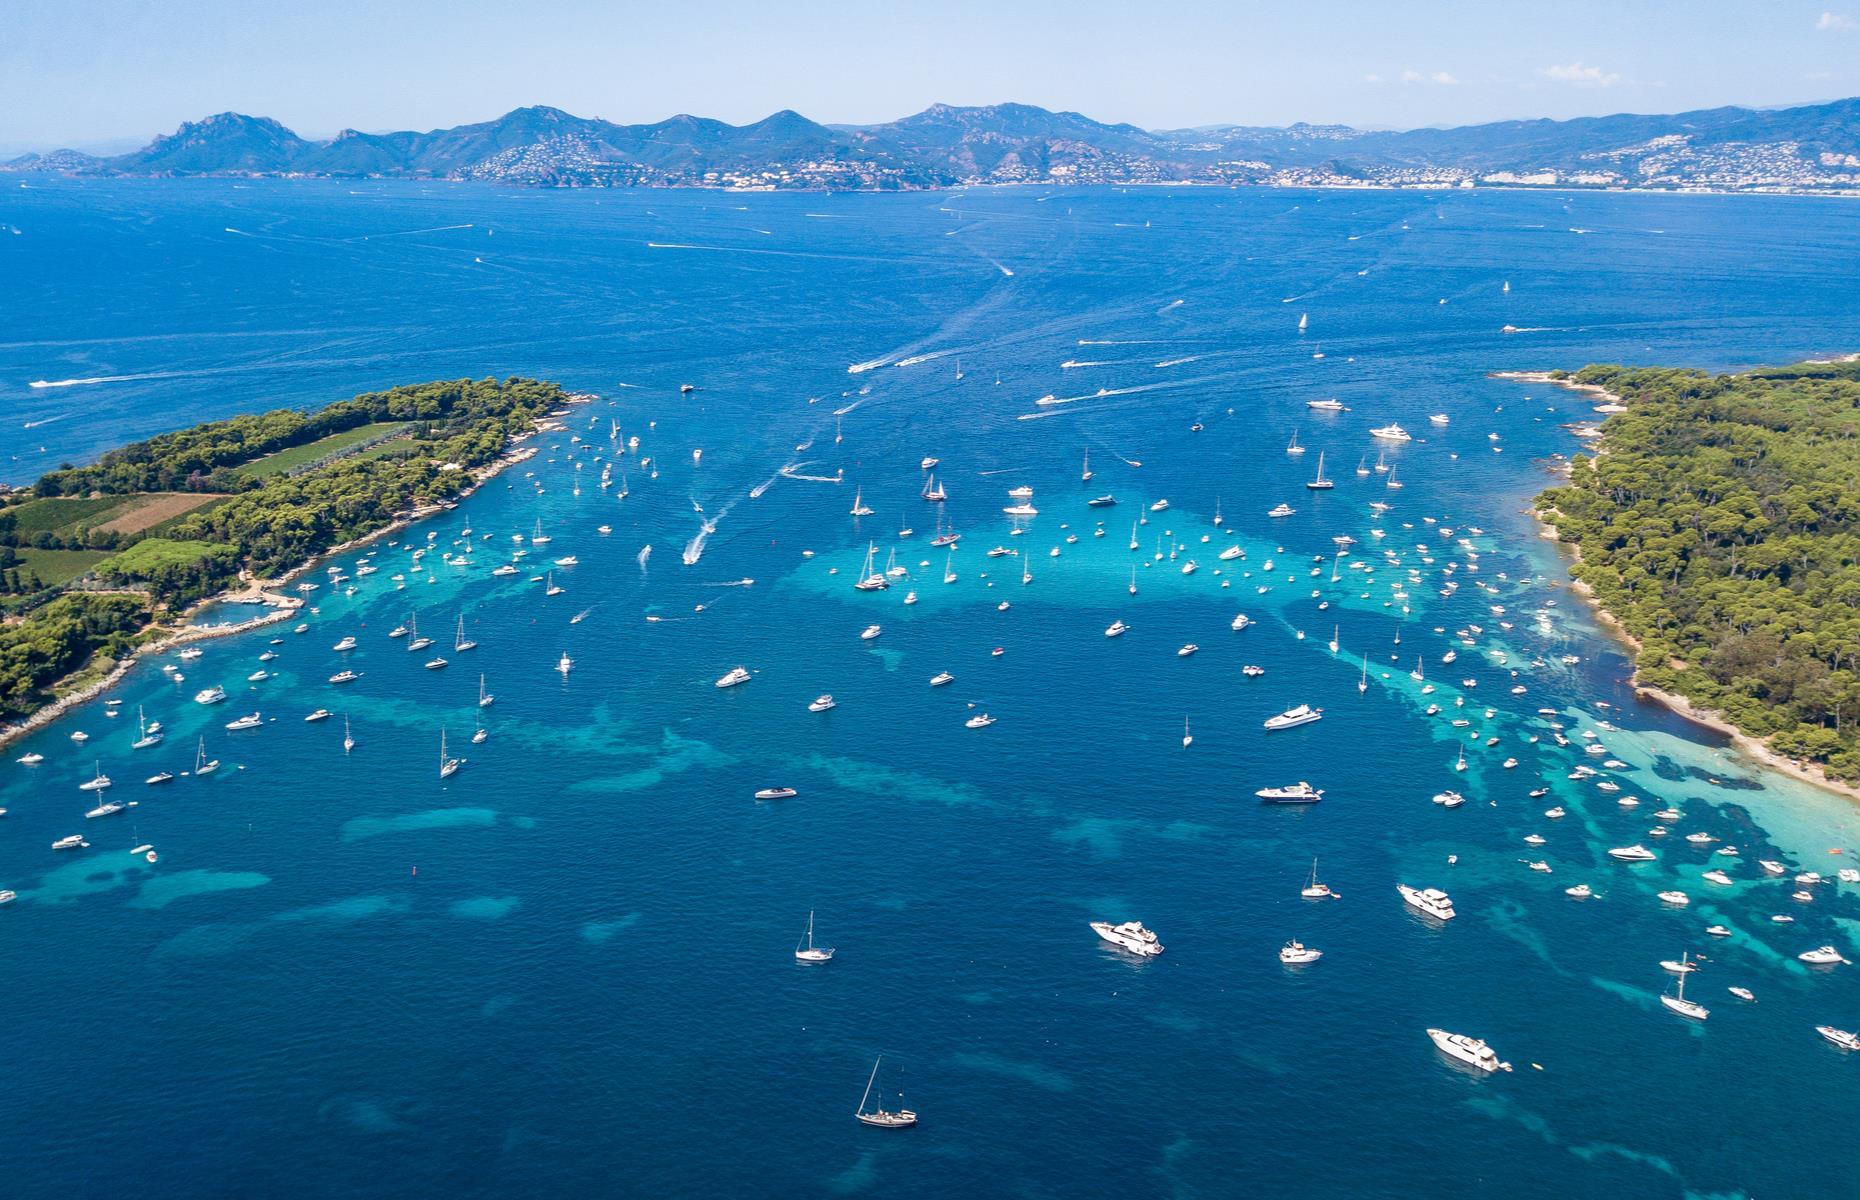 <p>The four Îles de Lérins lies just off the coast of Cannes on the French Riviera – Île Sainte-Marguerite is the largest while Île Saint-Honorat has been home to a monastic community since AD 410. A fry cry from Cannes’ glitzy Croisette promenade, you can reach the undeveloped wooded isles in just 15 minutes by ferry. While there are no hotels, they make a delightful day trip and exude a blissful calm. Pack a picnic or prepare to pay handsomely for the pleasure of lunch at one of the isle’s few restaurants – <a href="https://restaurantlaguerite.com/">La Guérite</a> has lured the jet set since 1902 with its glorious views and upscale food.</p>